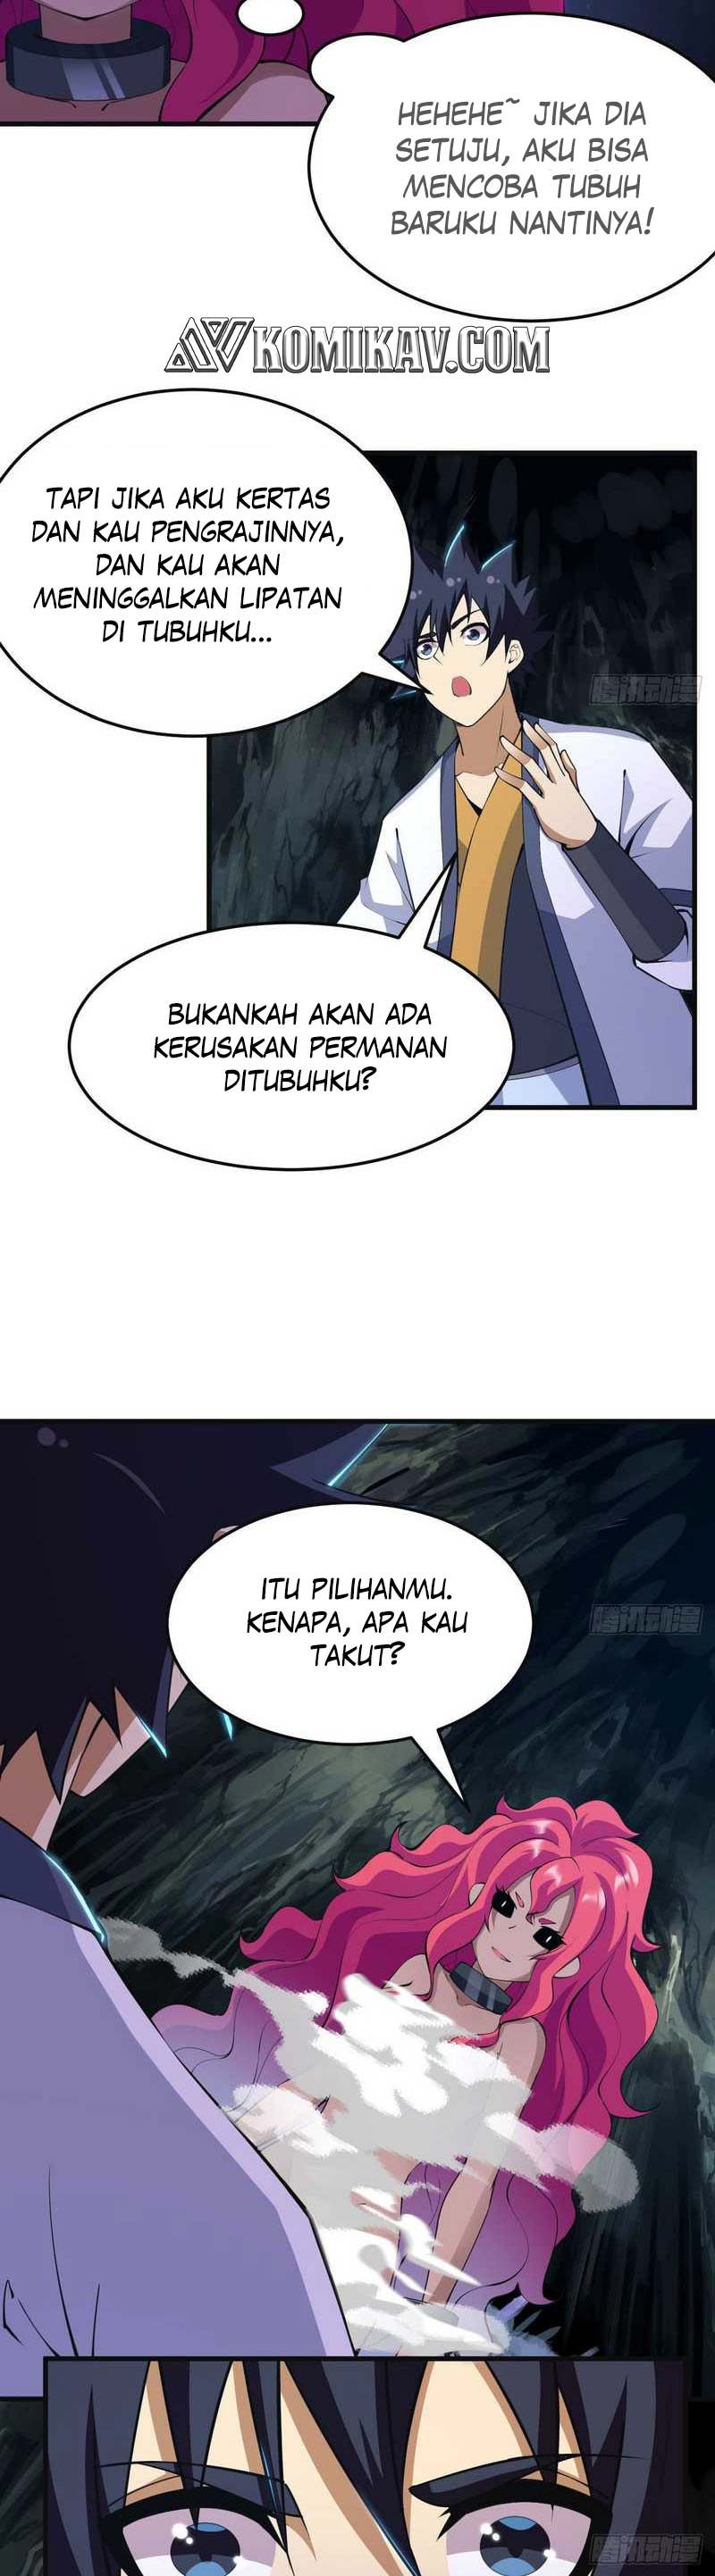 Dilarang COPAS - situs resmi www.mangacanblog.com - Komik i just want to be beaten to death by everyone 083 - chapter 83 84 Indonesia i just want to be beaten to death by everyone 083 - chapter 83 Terbaru 4|Baca Manga Komik Indonesia|Mangacan